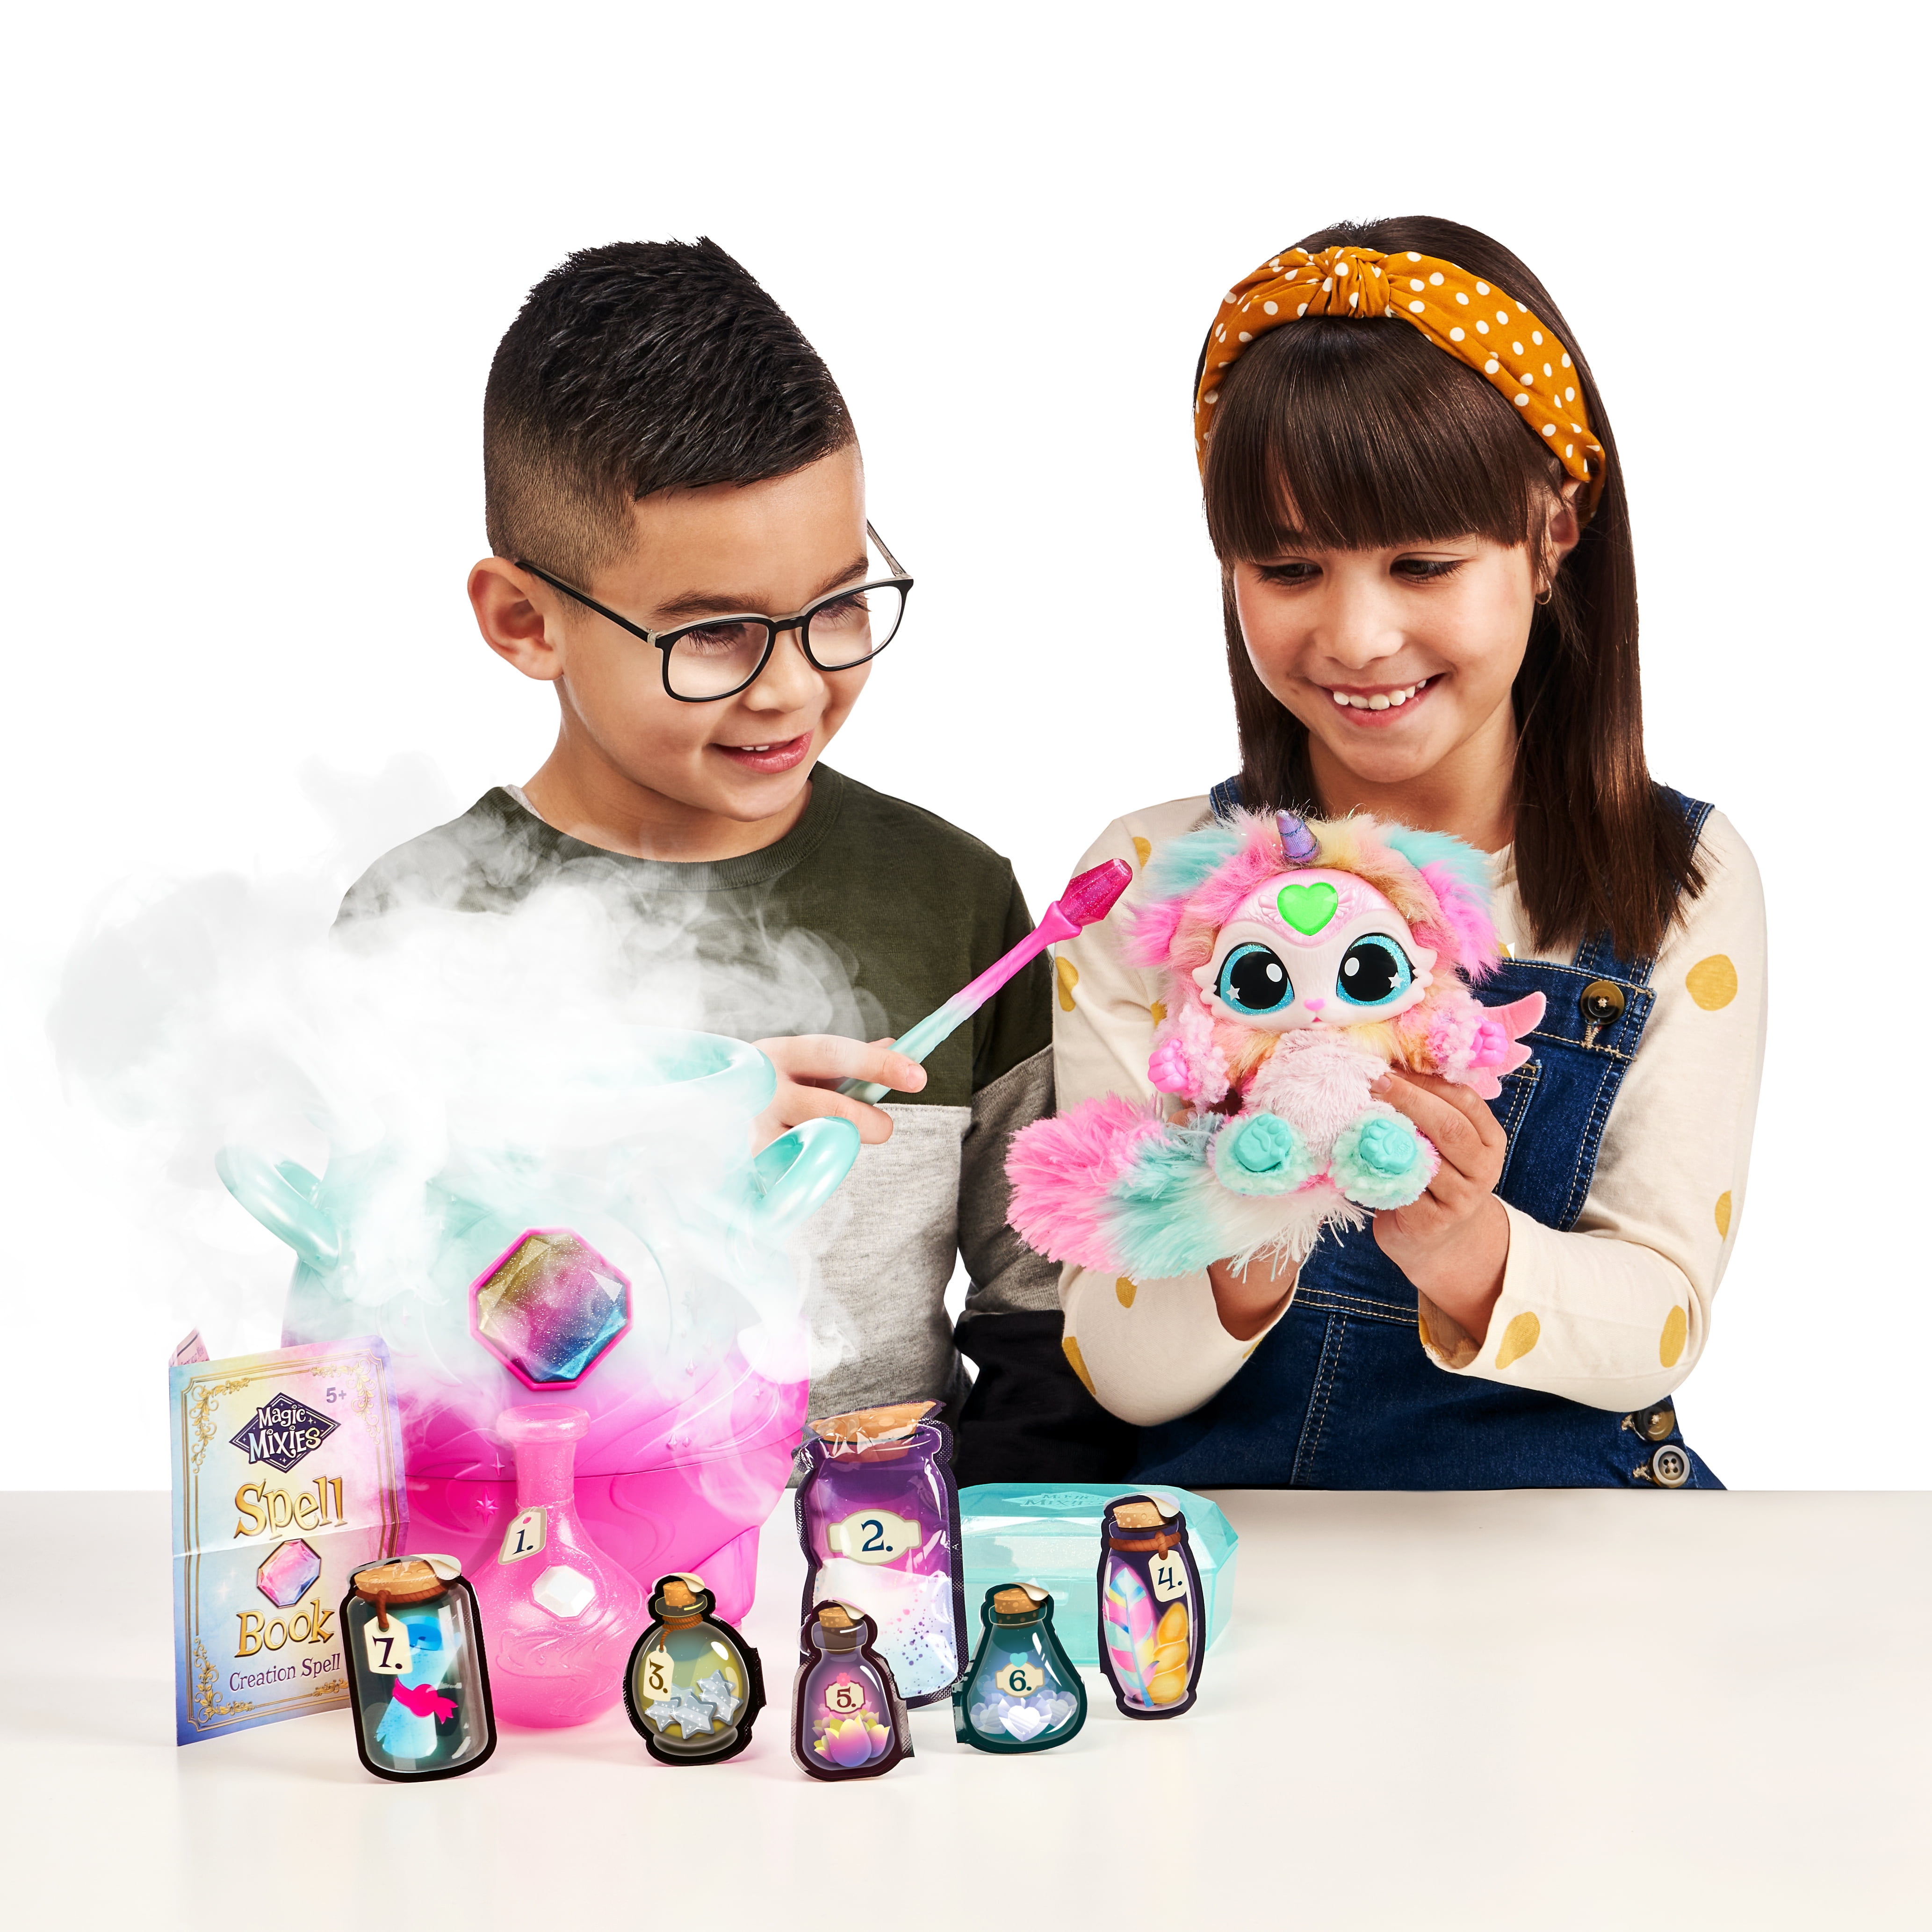 Magic Mixies Magical Misting Cauldron with Exclusive Interactive 8 inch  Rainbow Plush Toy and 50+ Sounds and Reactions, Toys for Kids, Ages 5+ 